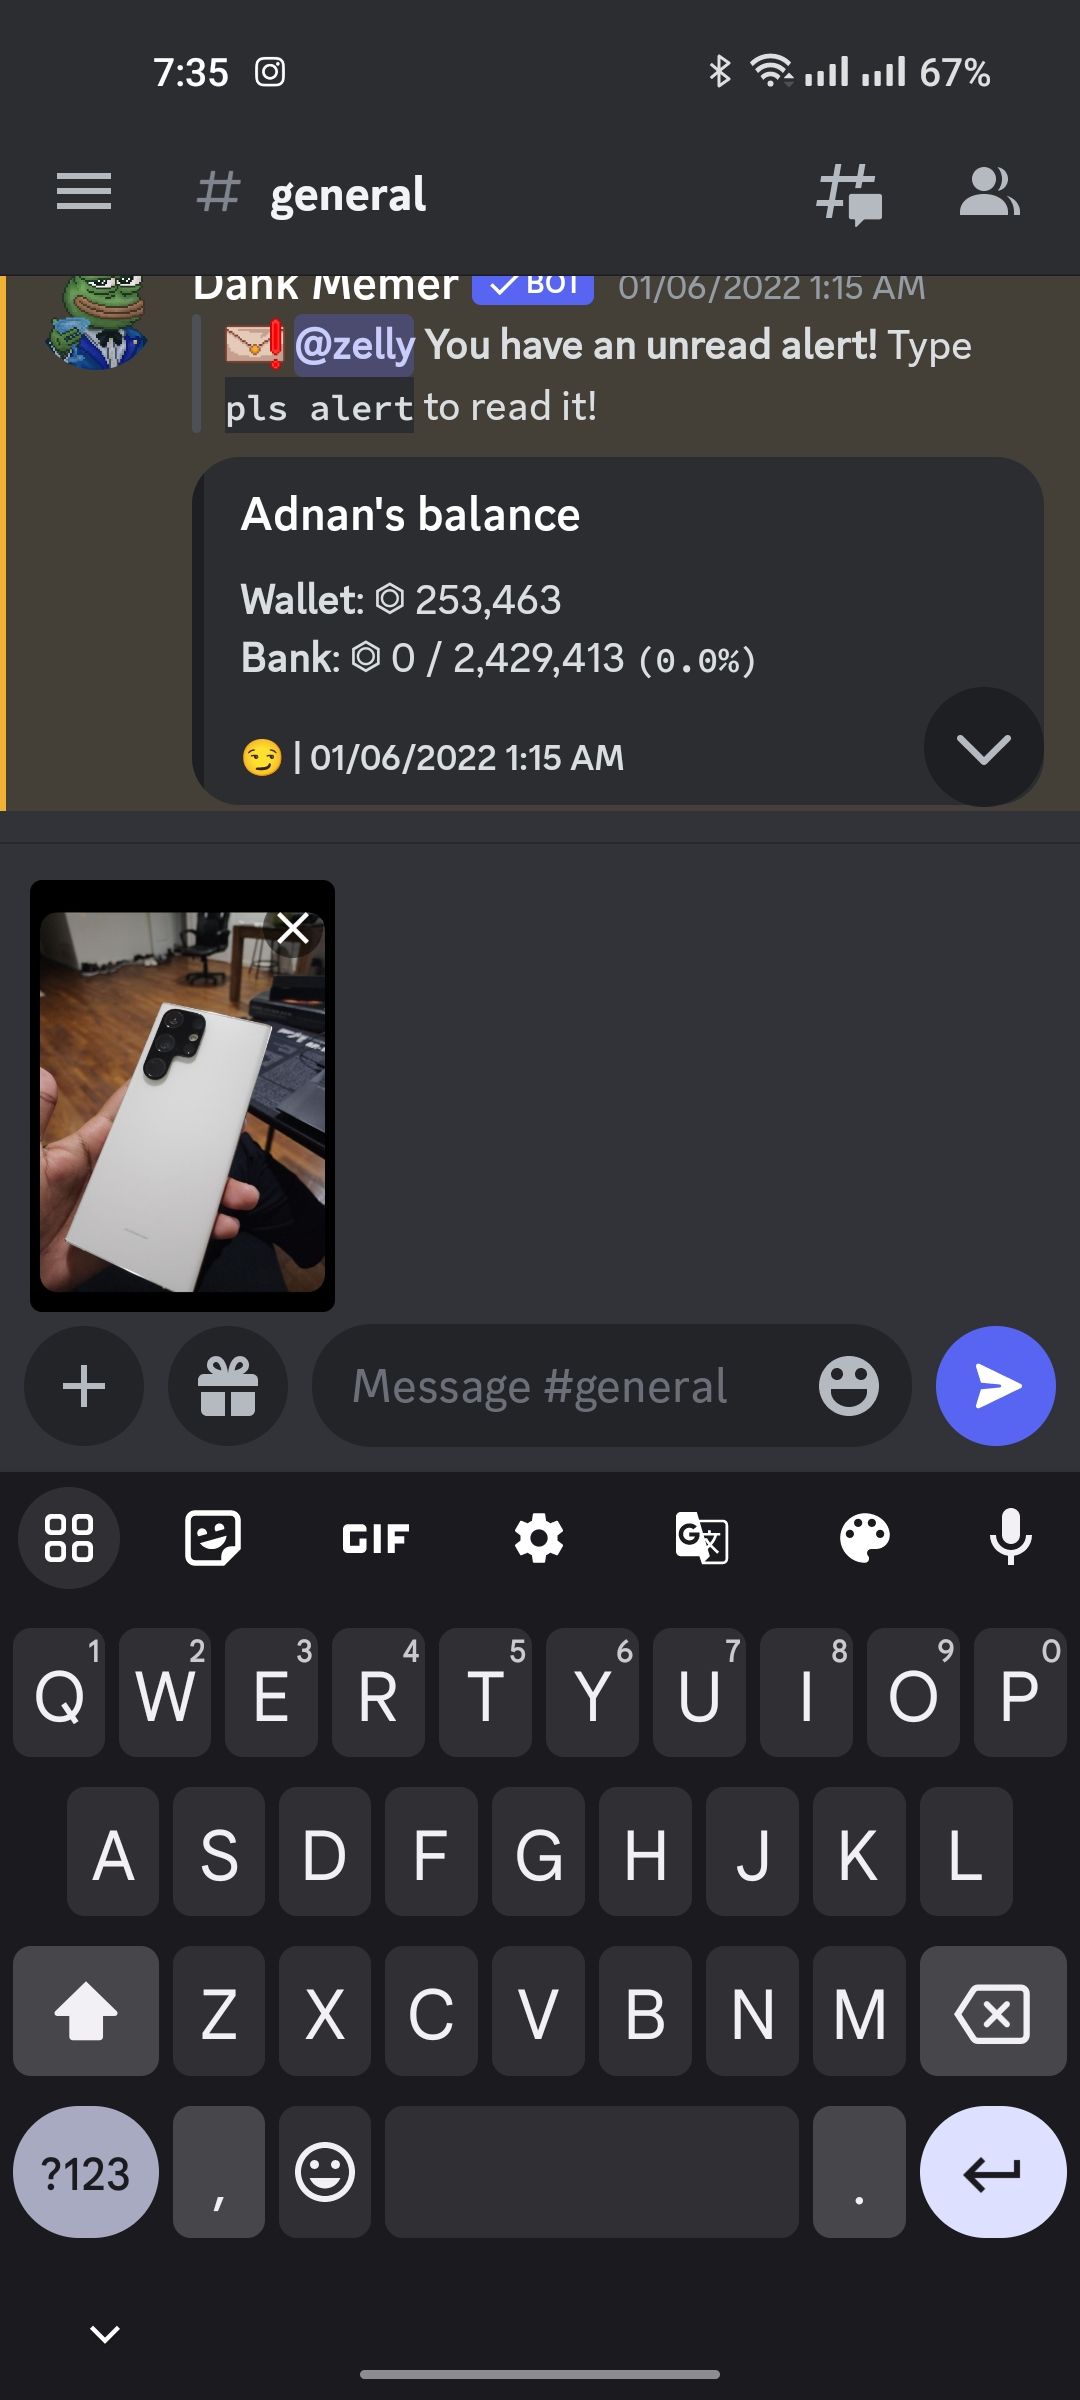 Attaching an image on Discord mobile